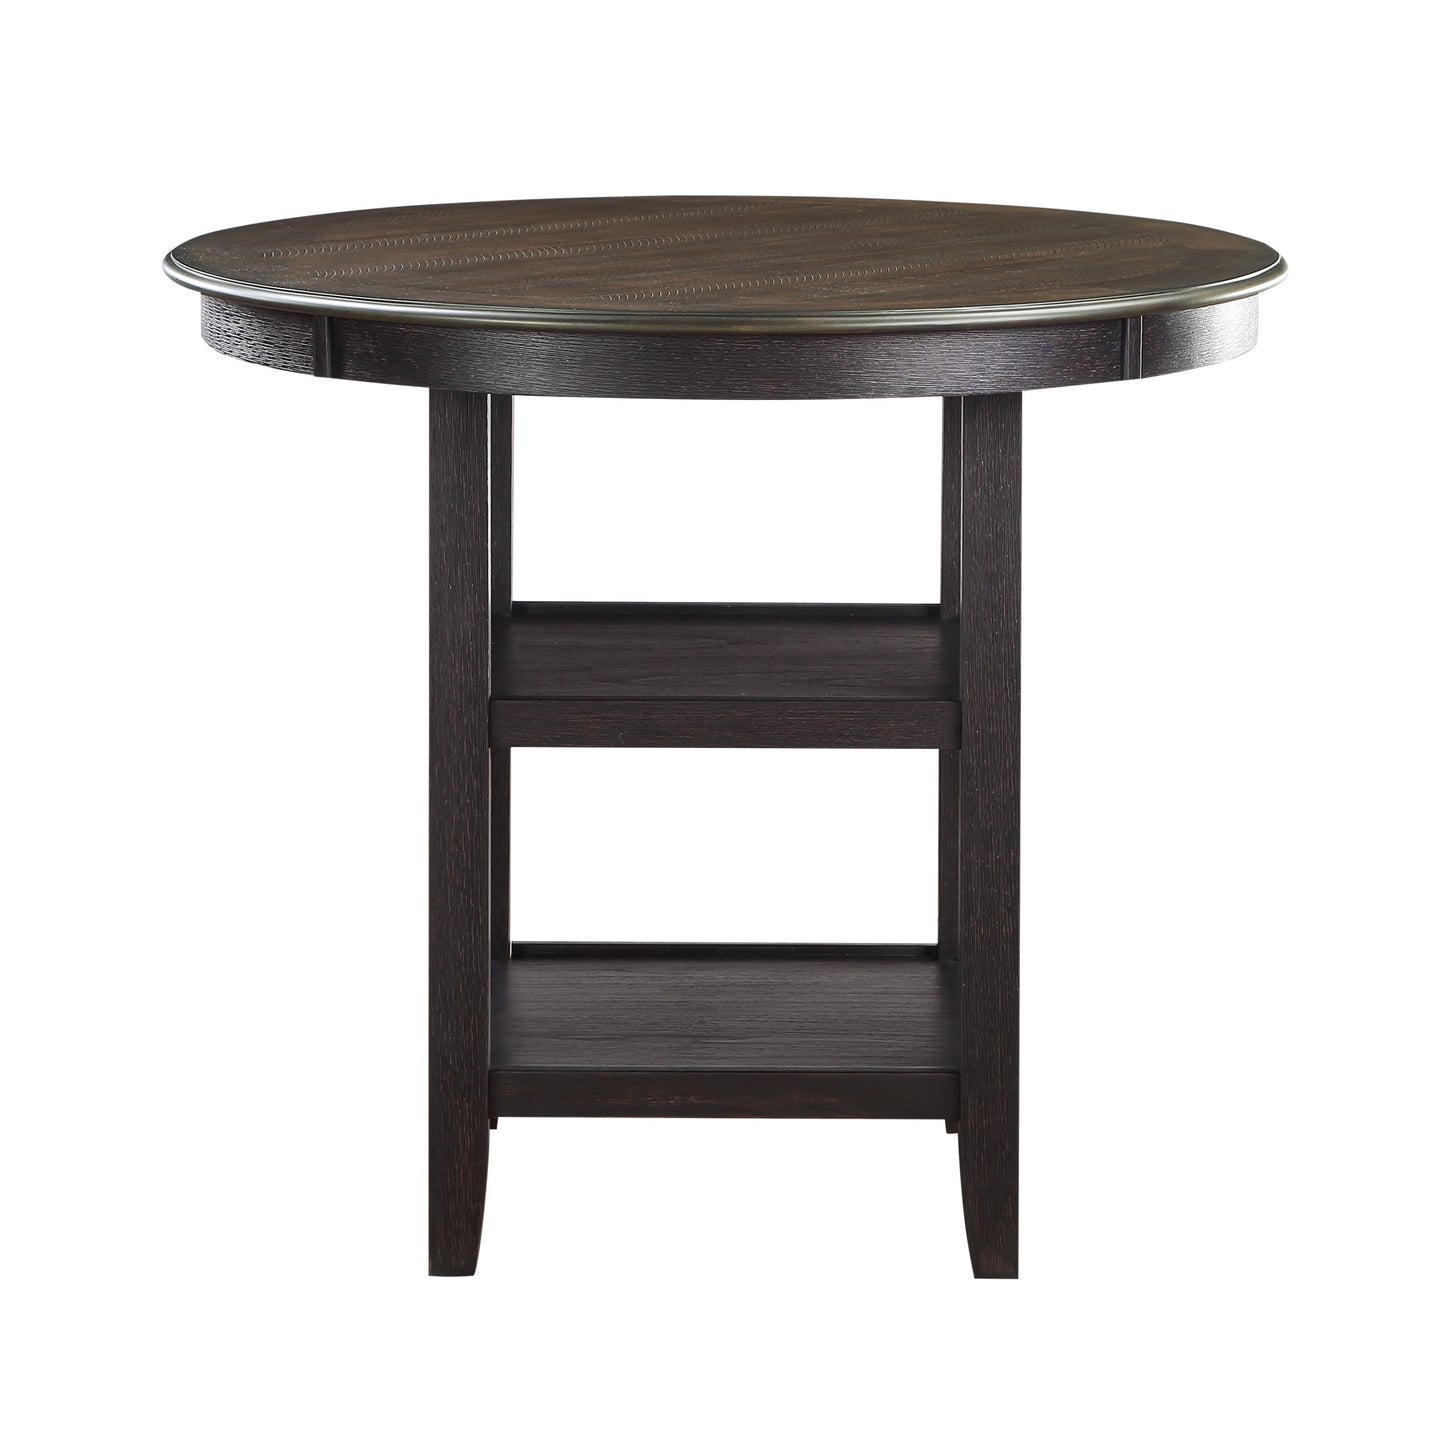 Amos Counter-Height Dining Table - Black